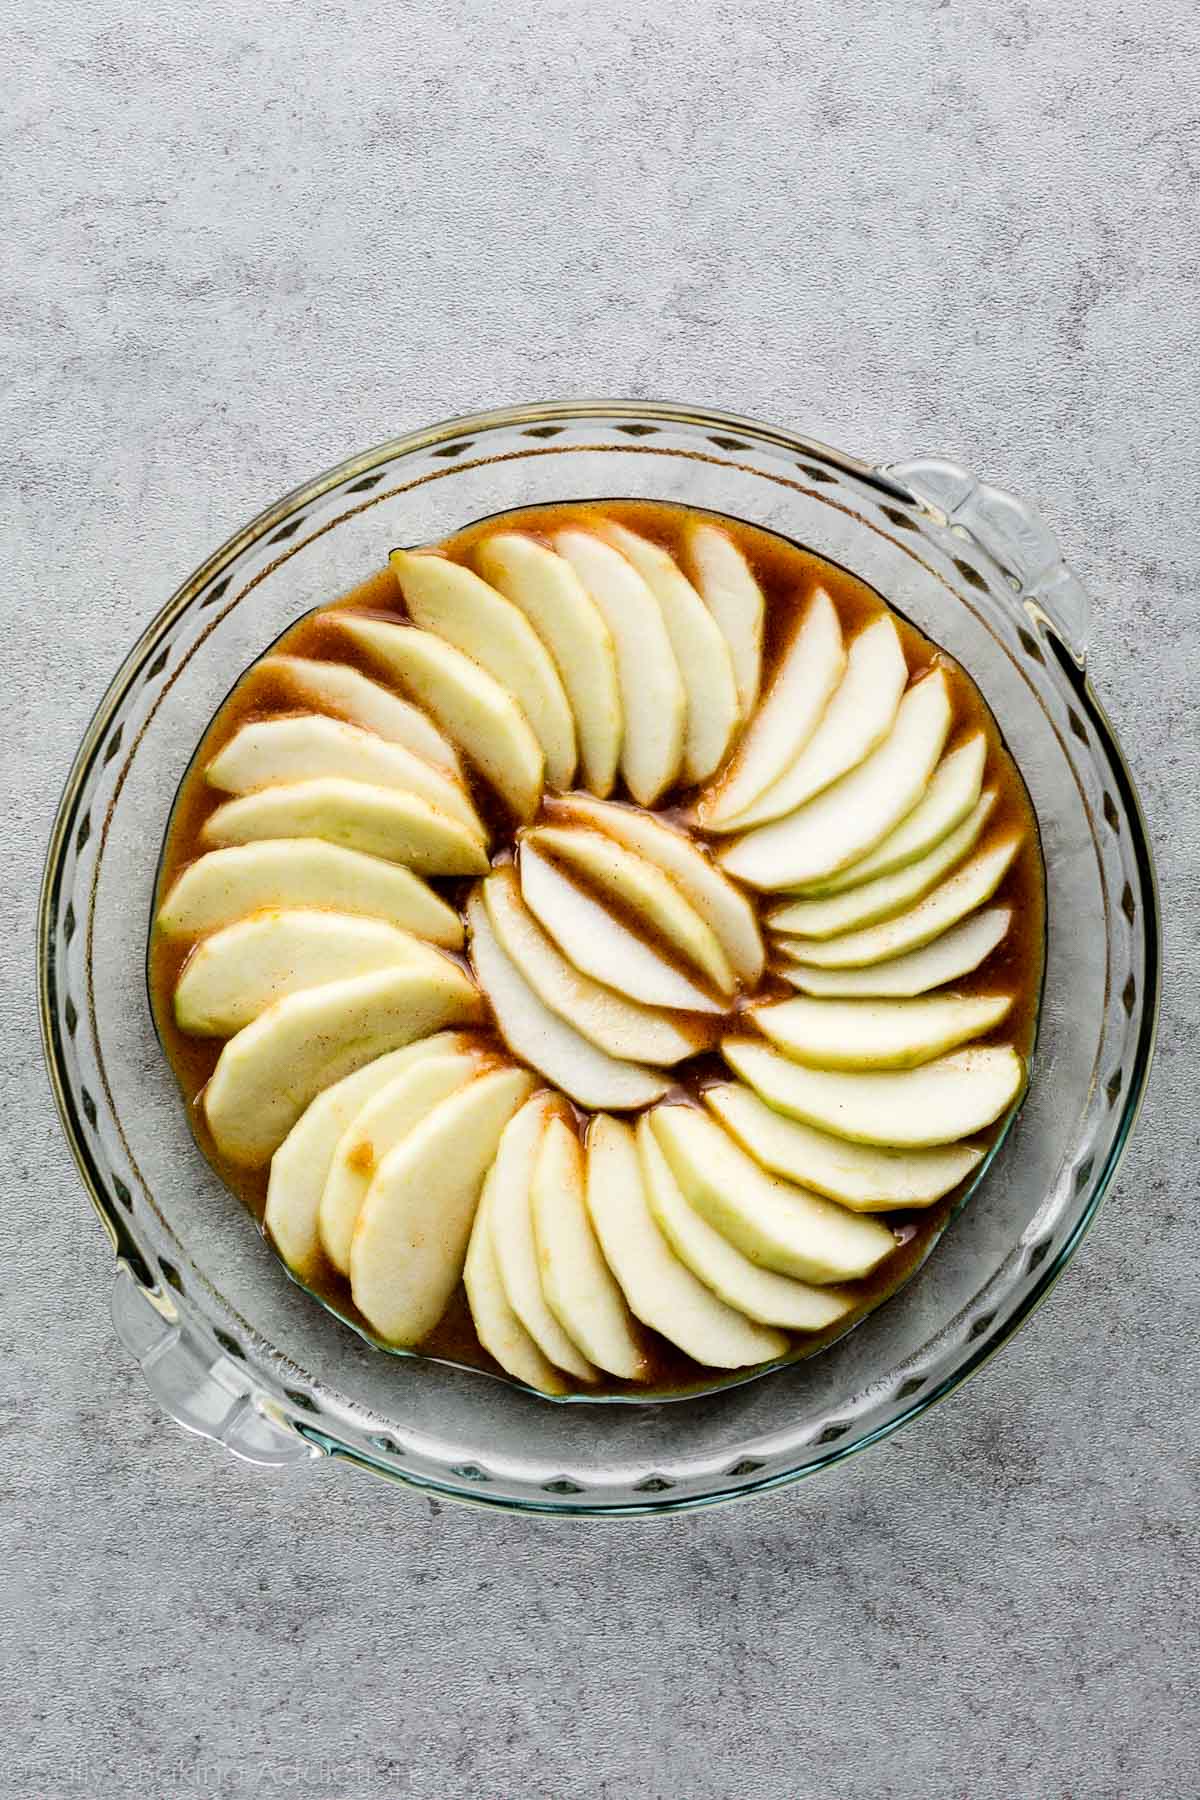 apple slices arranged in glass a pie dish